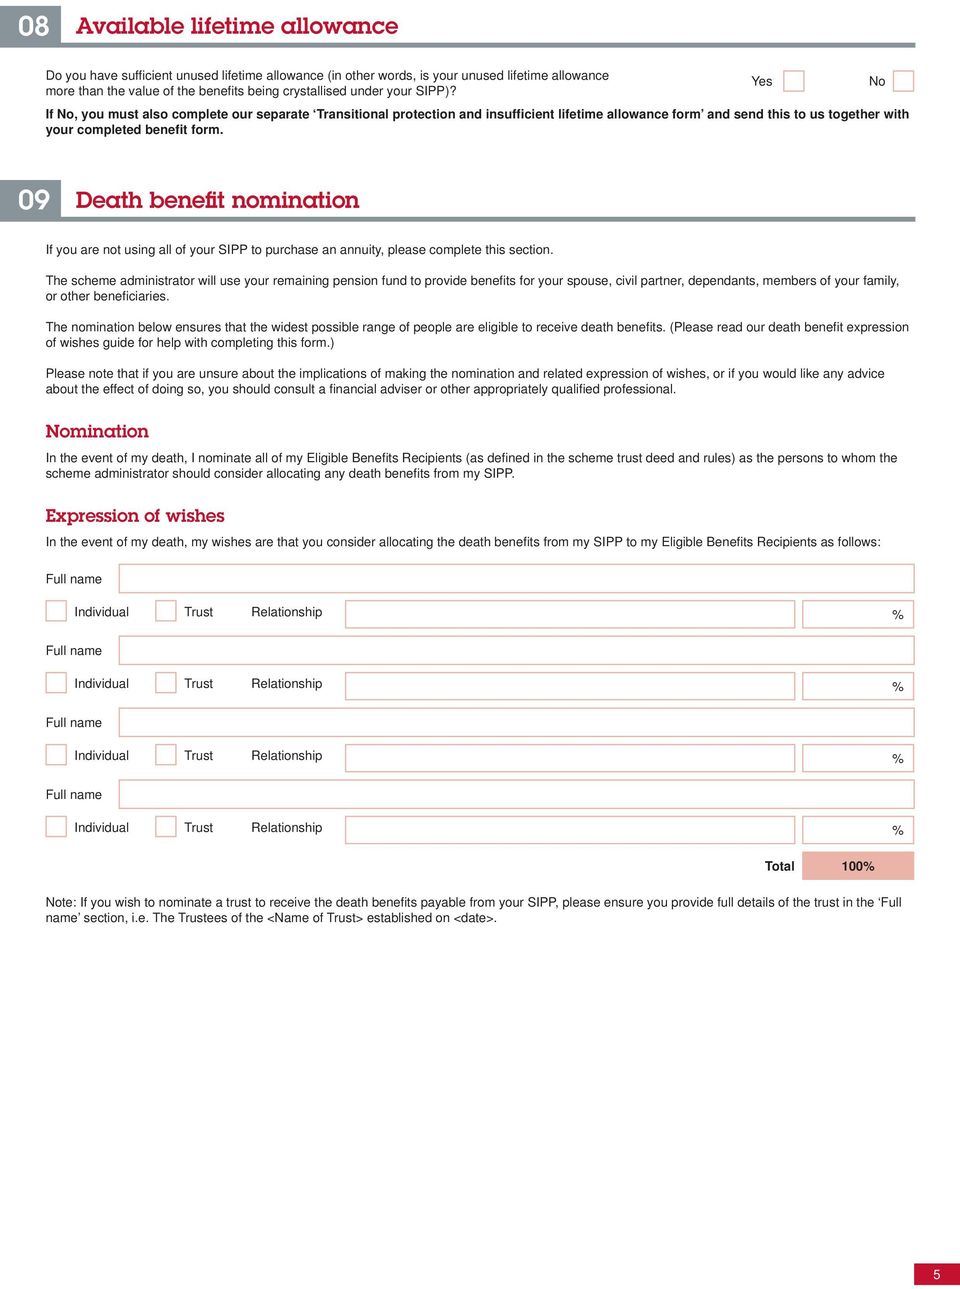 09 Death benefit nomination If you are not using all of your SIPP to purchase an annuity, please complete this section.